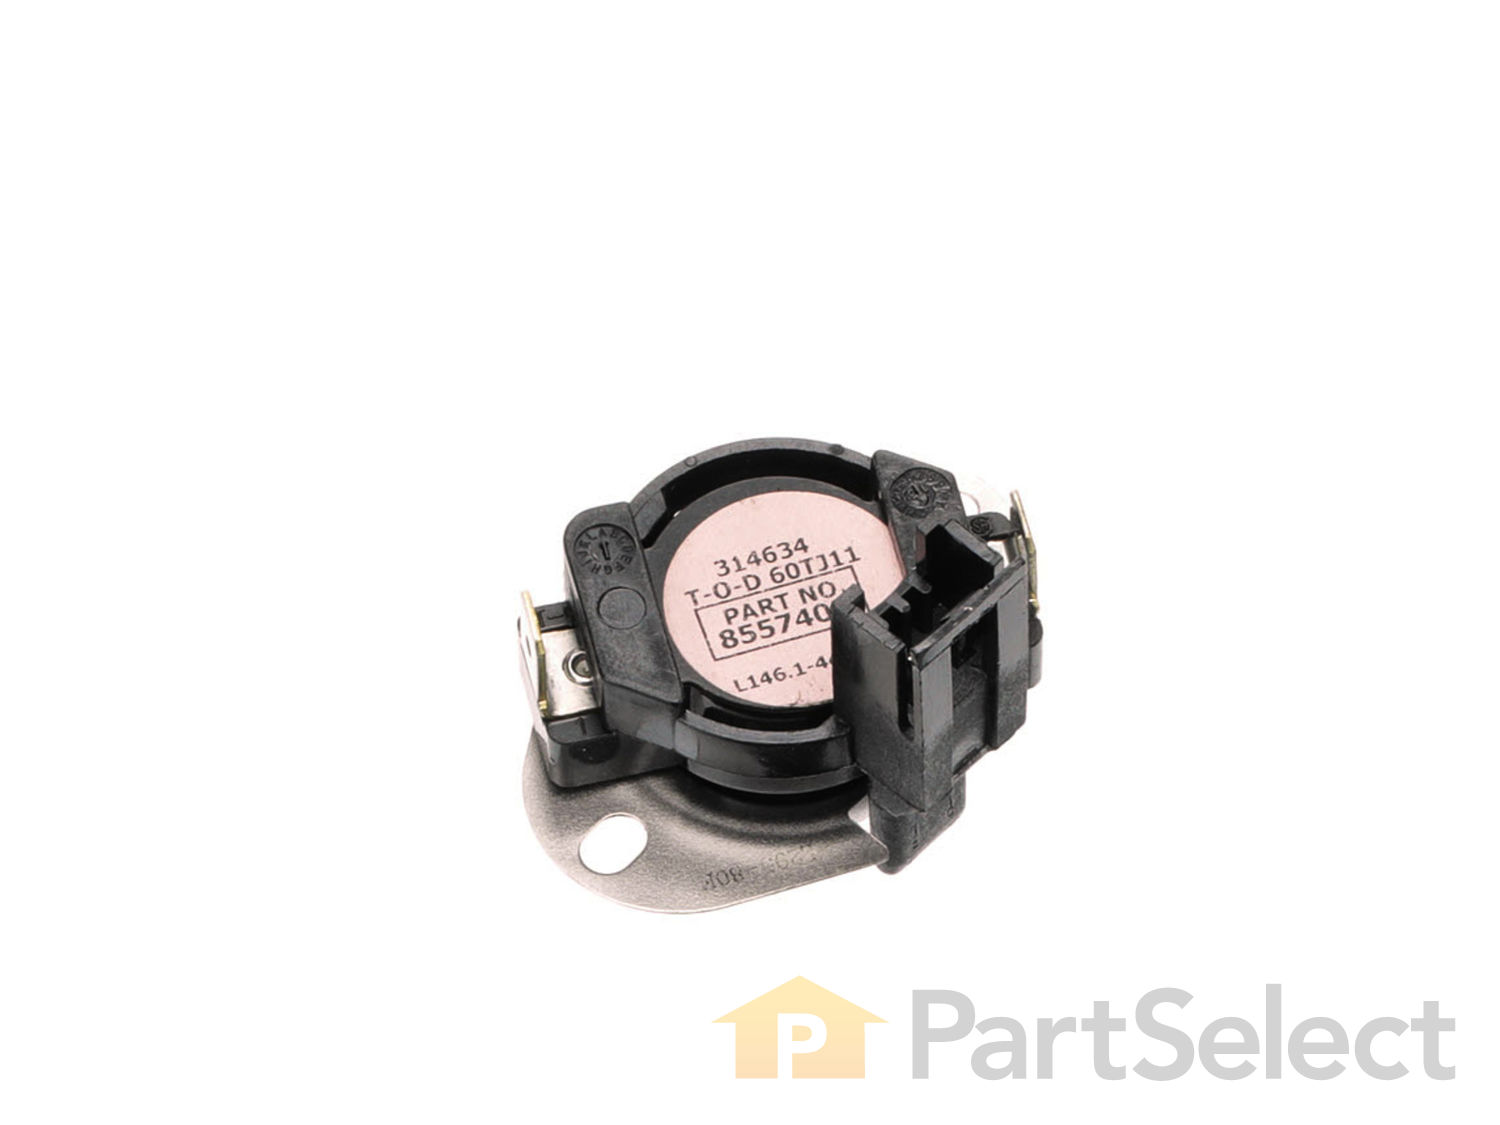 Whirlpool WP8557403 Fixed Thermostat for Dryer 